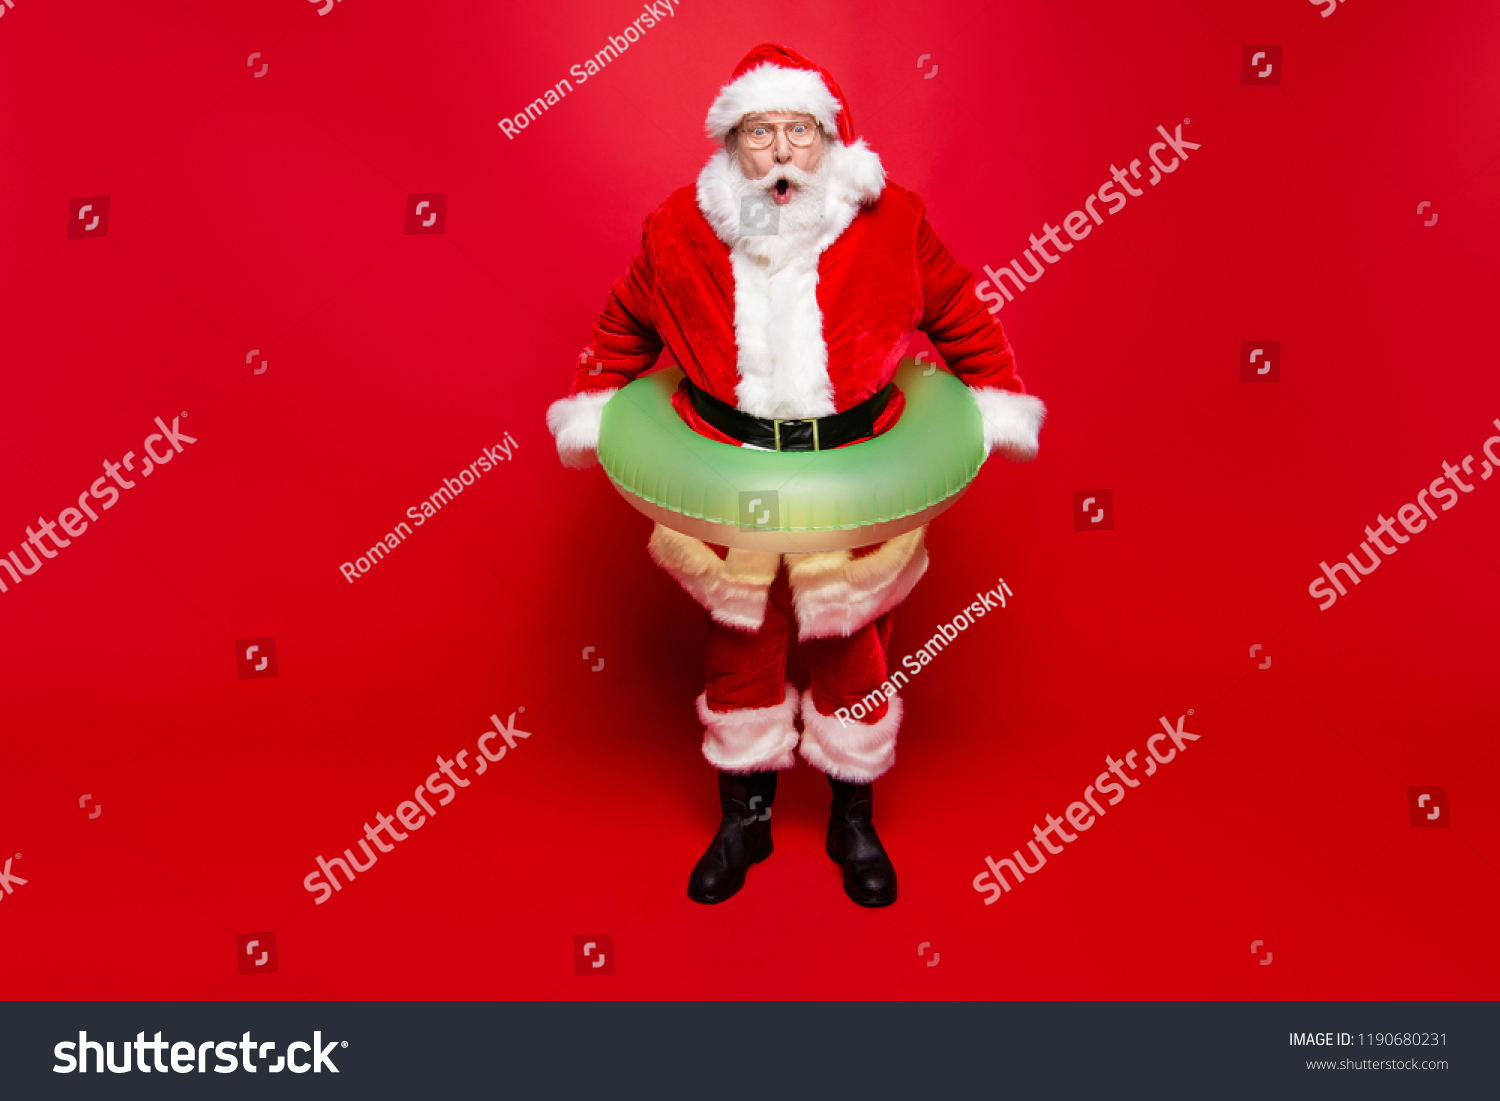 December noel eve sale discount pool party. Full legs body size aged mature grandfather funny Santa tradition costume headwear spectacles white beard isolated red background open mouth staring eyes #1190680231